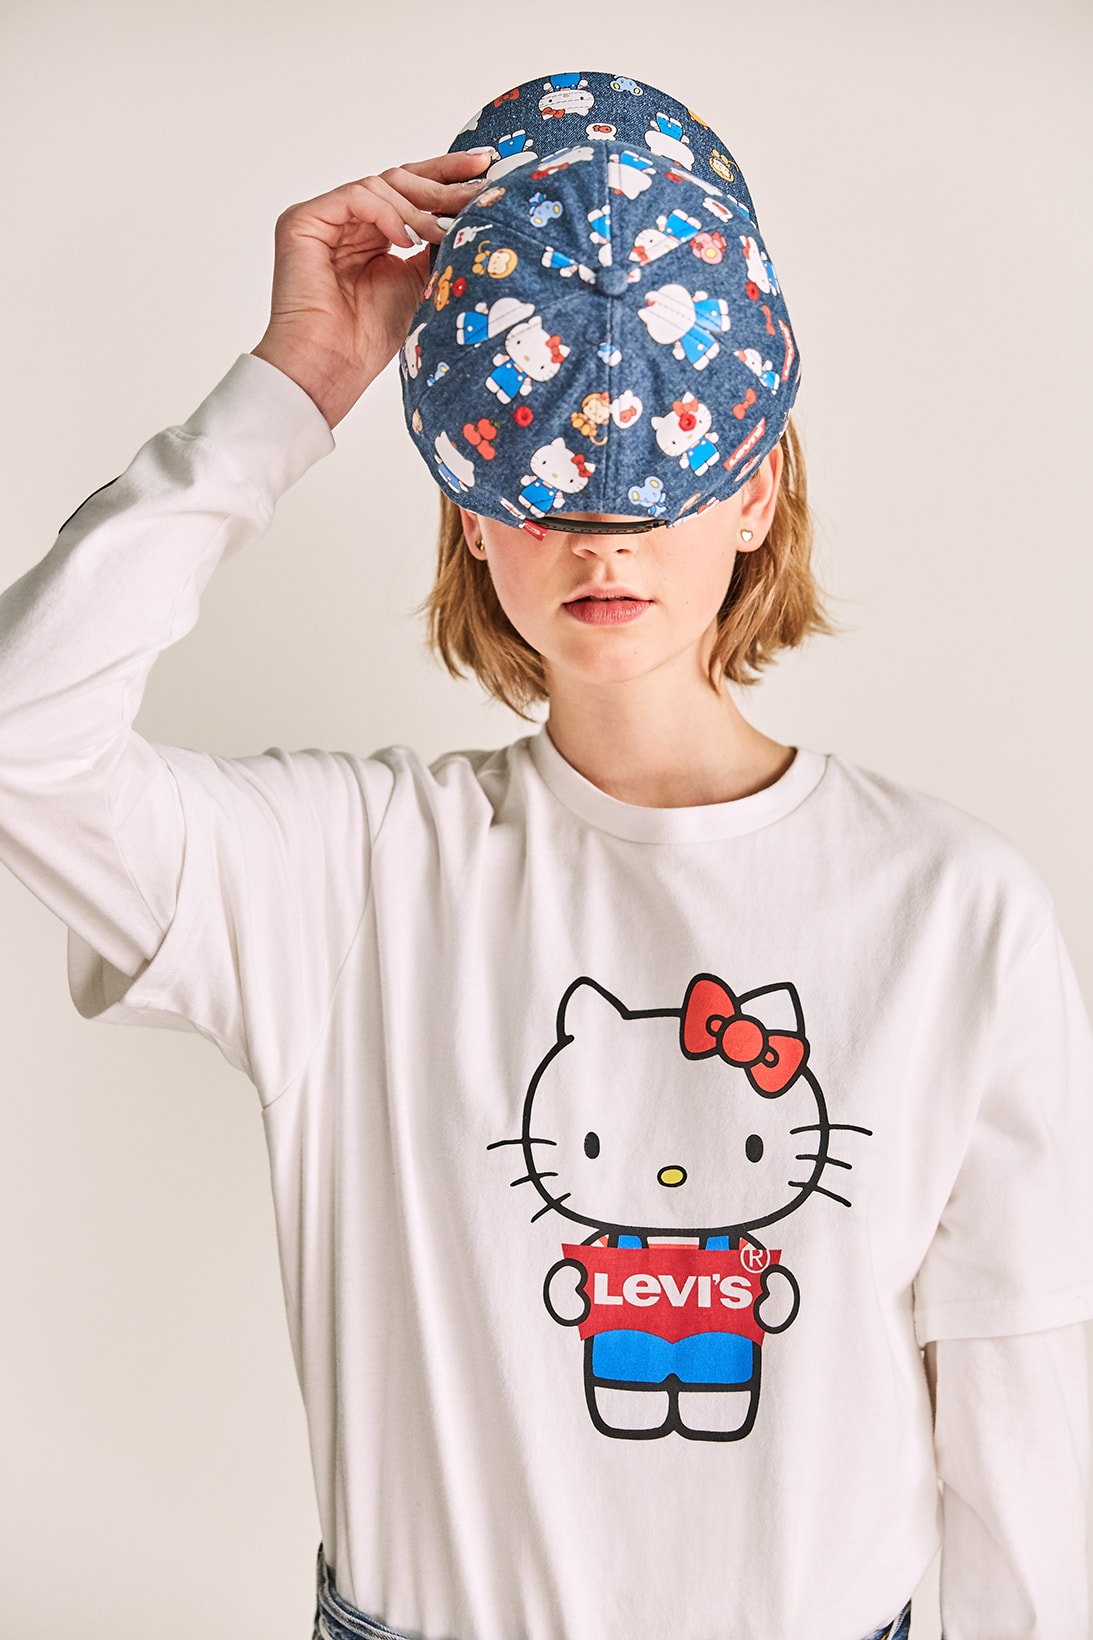 levis hello kitty anniversary collaboration collection womens girls limited edition tshirts overalls hoodies denim jackets jeans bags